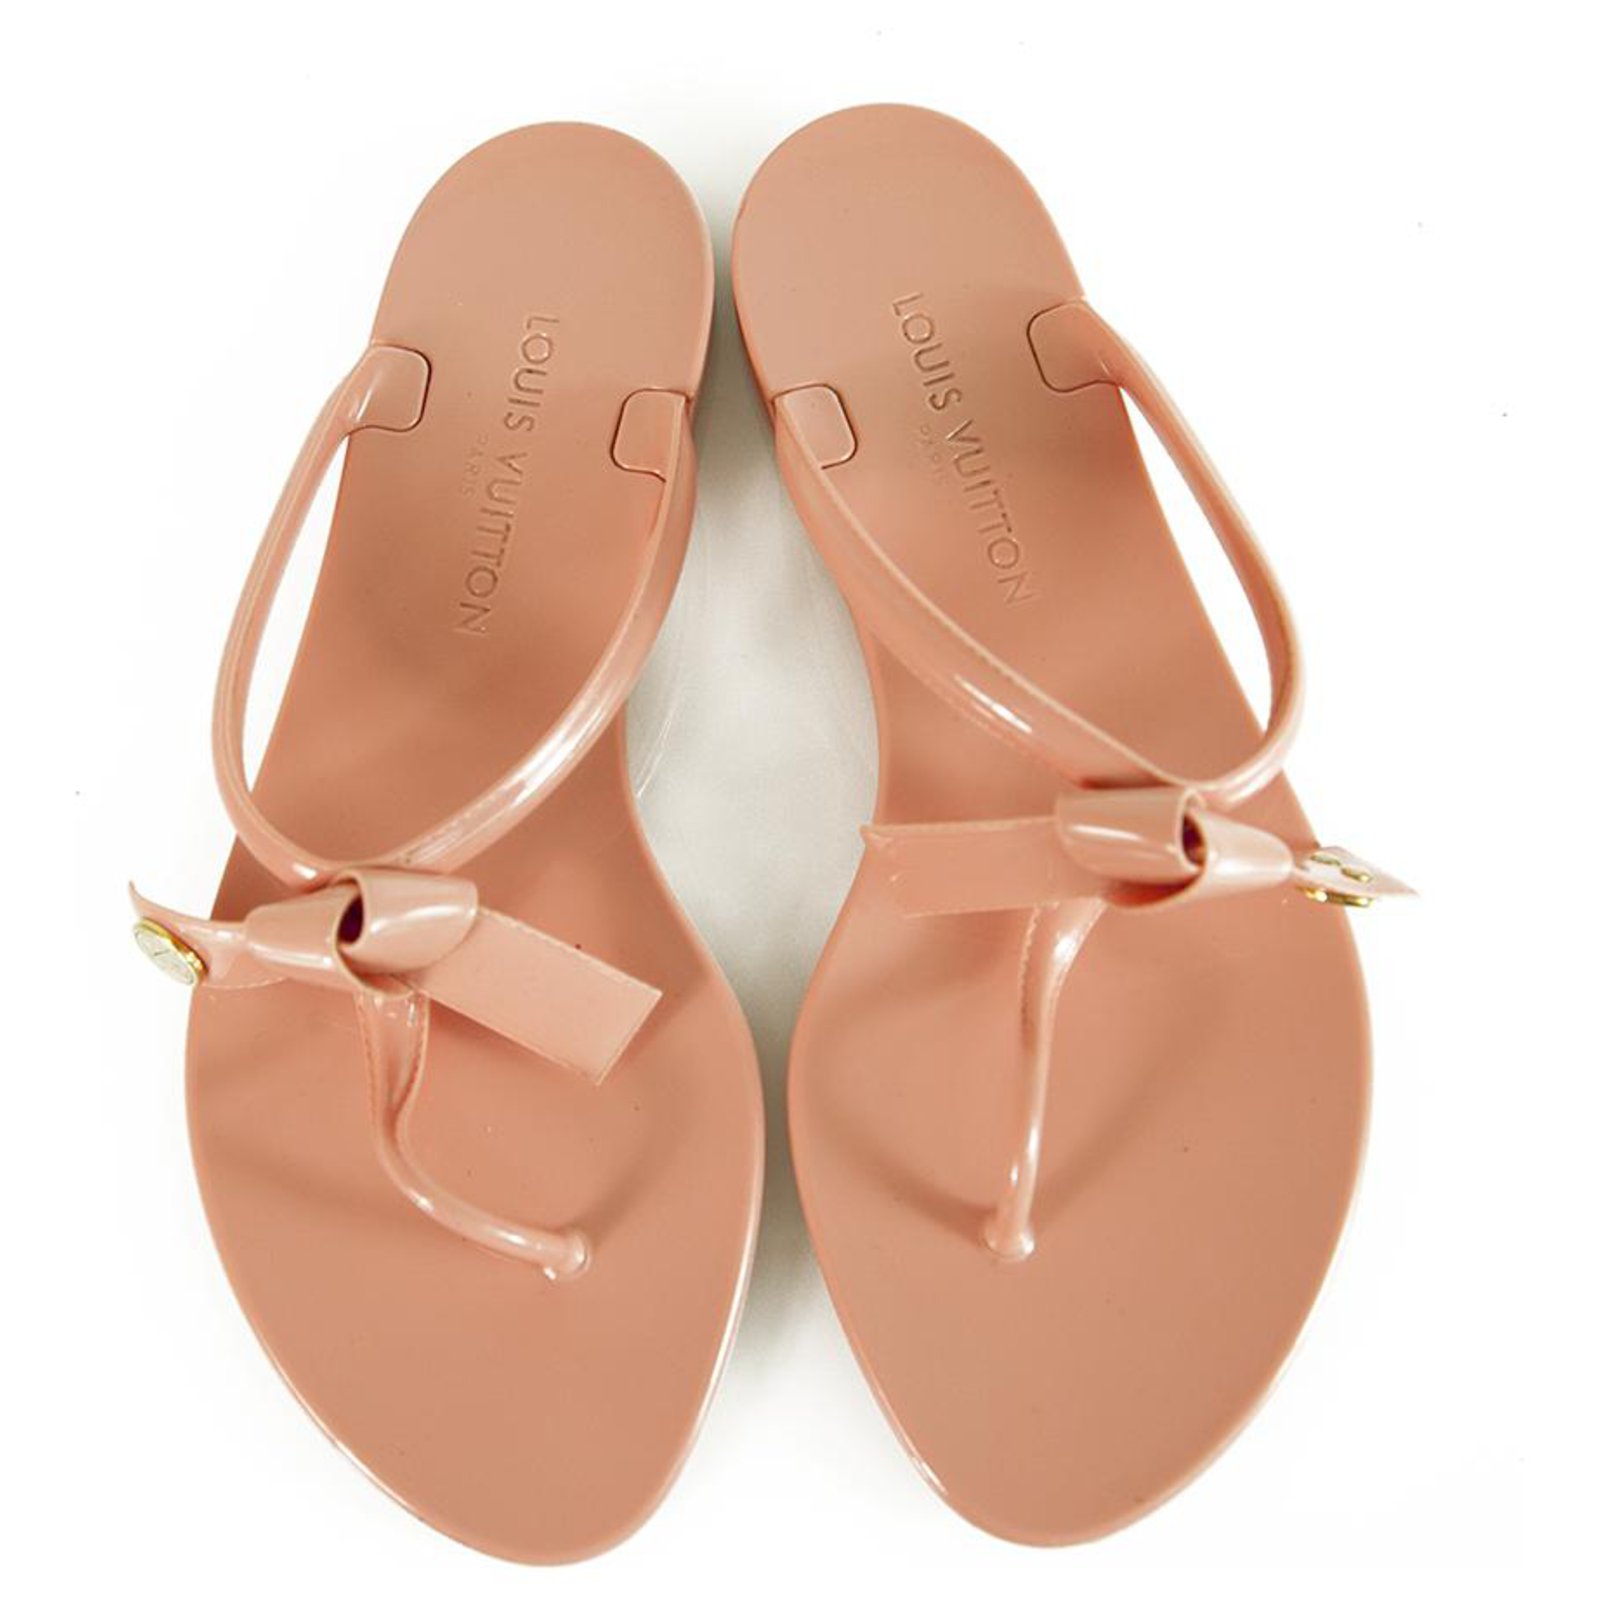 Louis Vuitton Jelly Sea Star Thong Sandals - Size 6 / 36